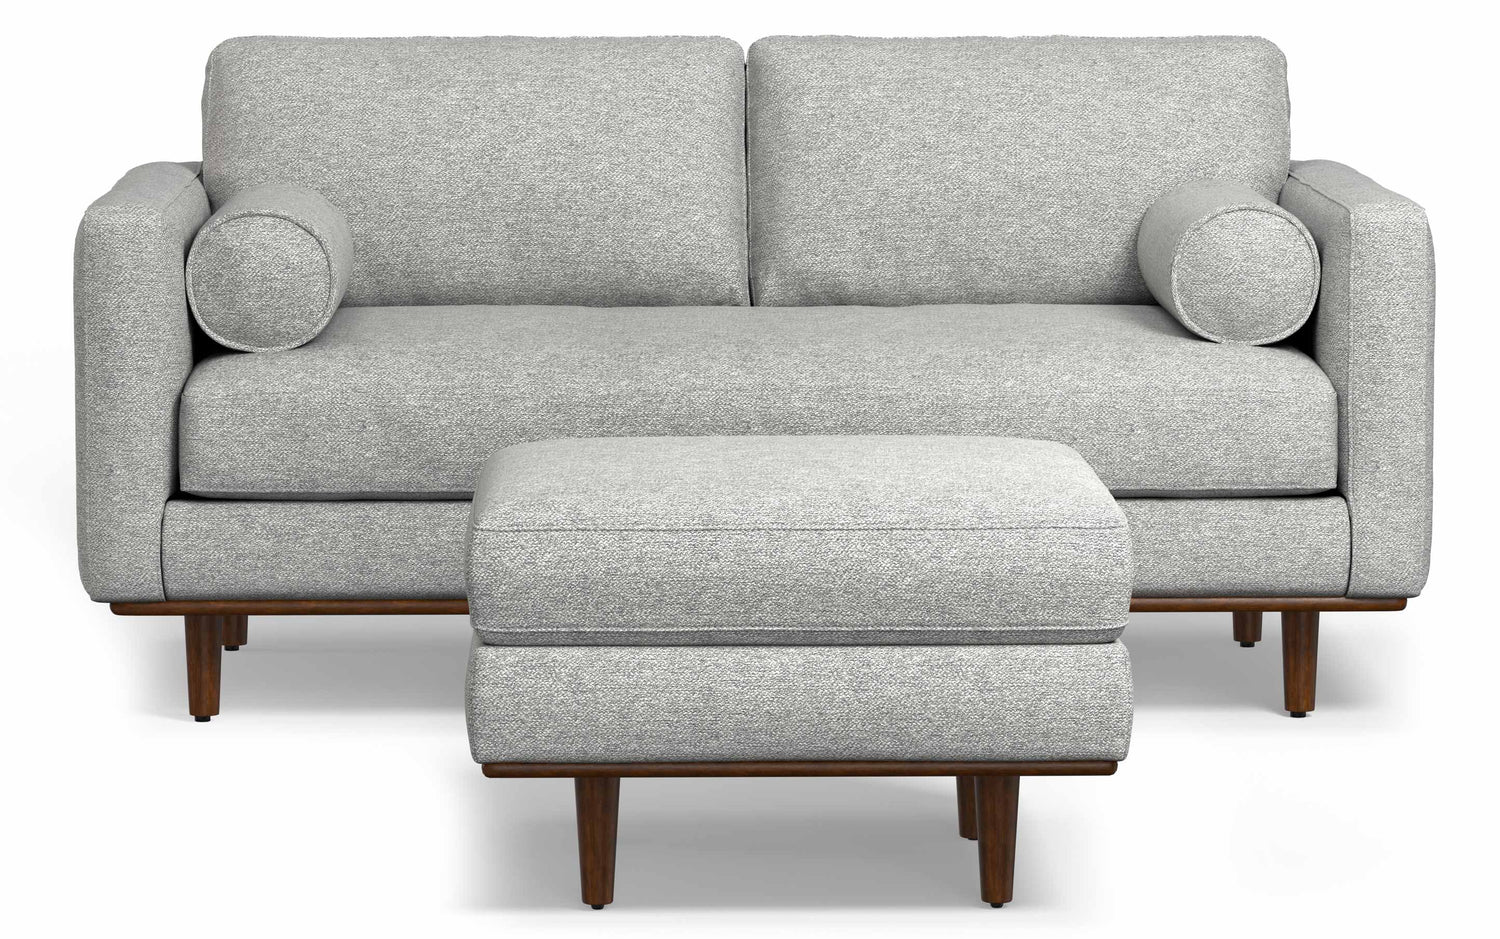 Mist Grey Woven-Blend Fabric | Morrison 72-inch Sofa and Ottoman Set in Woven-Blend Fabric